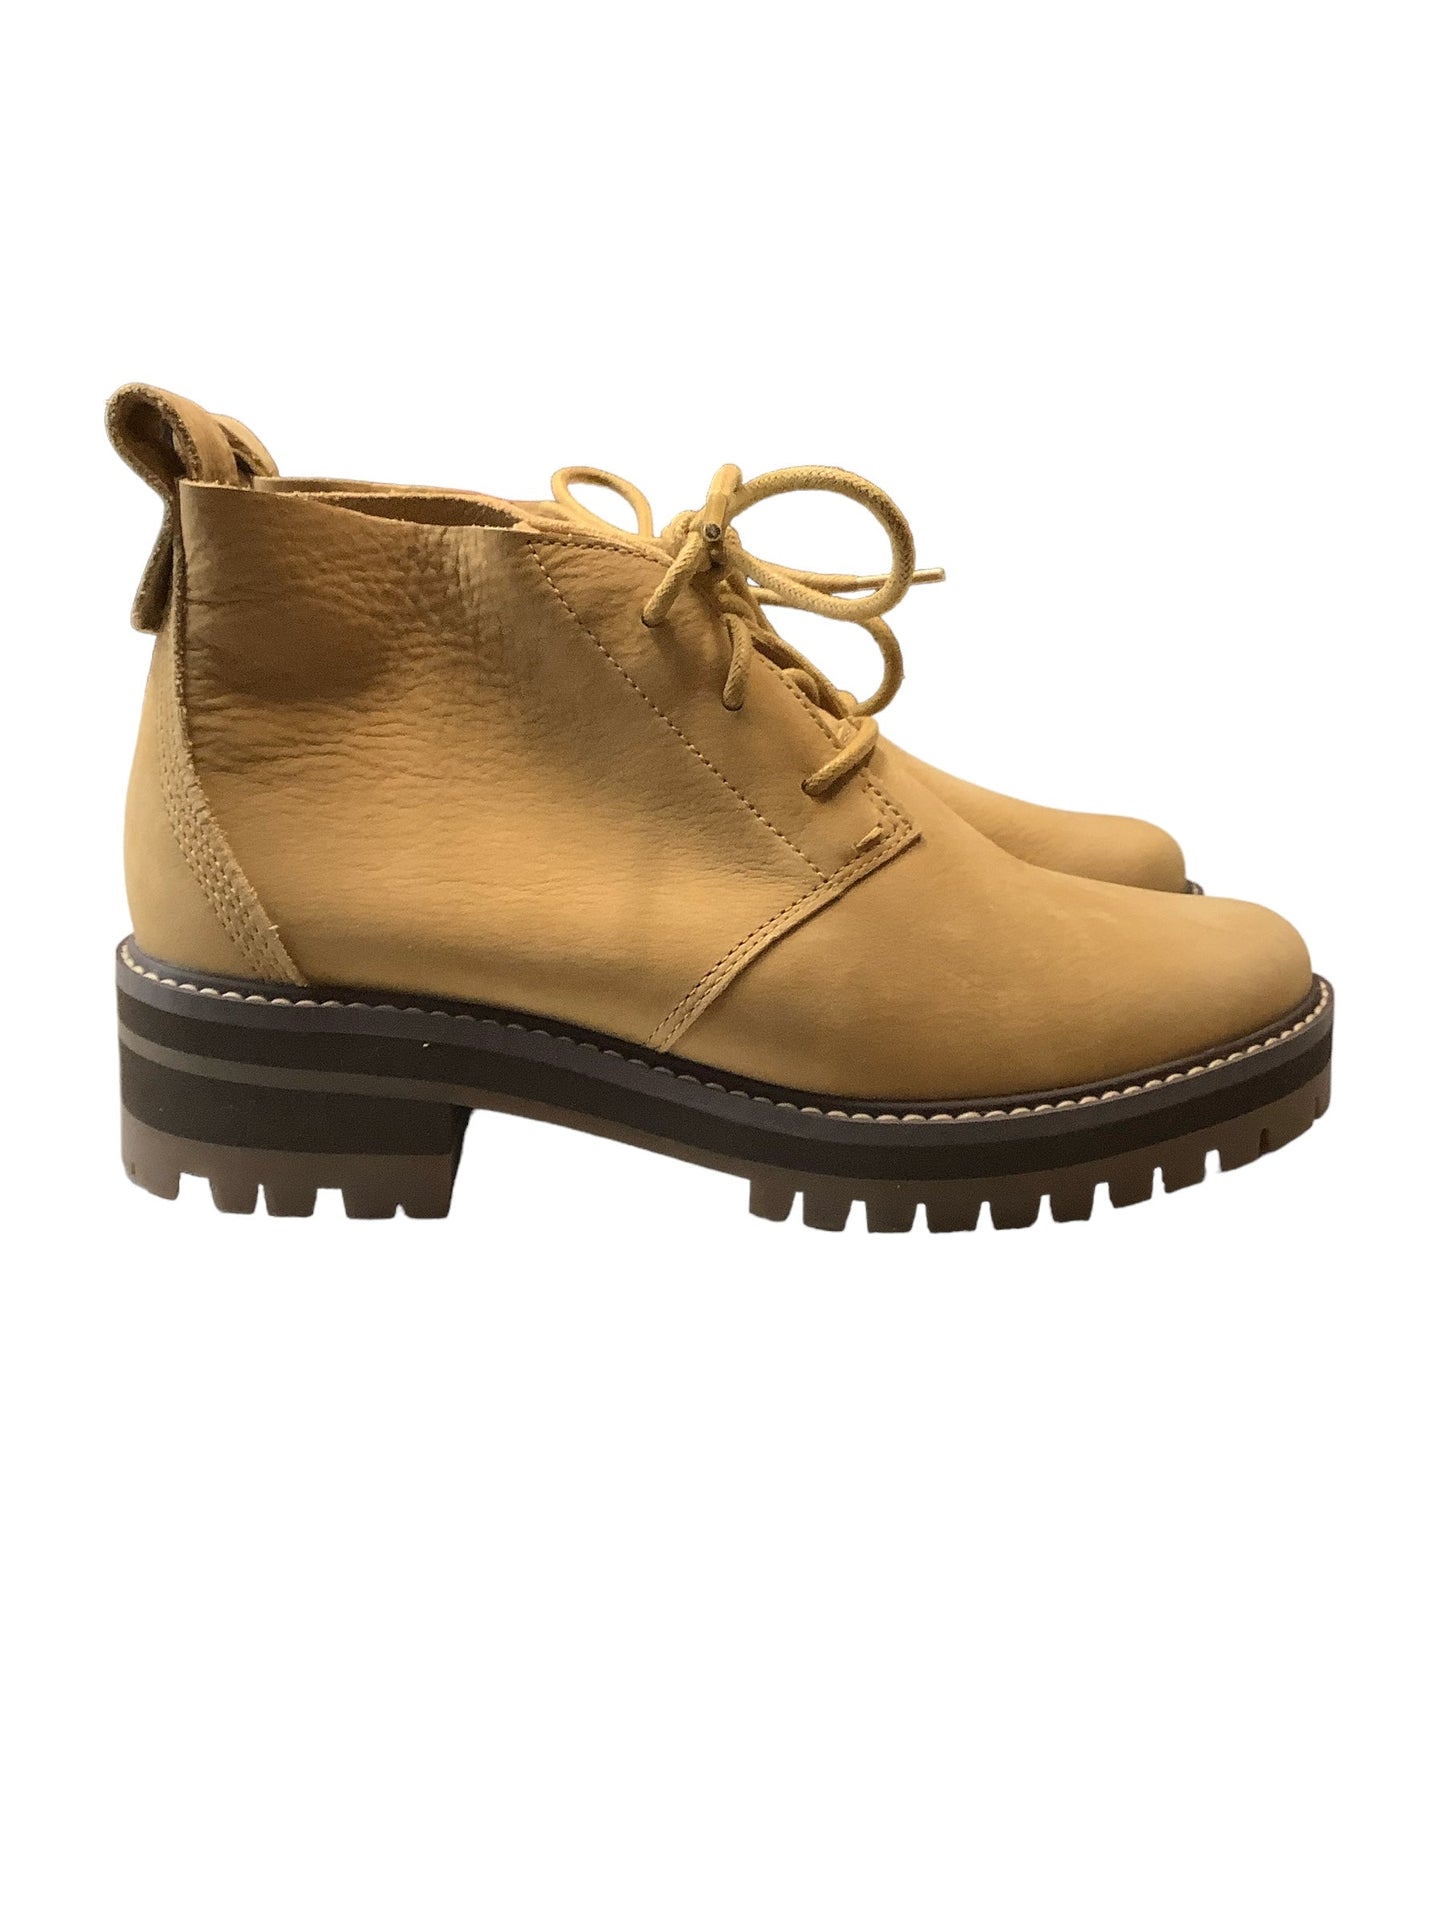 Boots Ankle Flats By Timberland  Size: 7